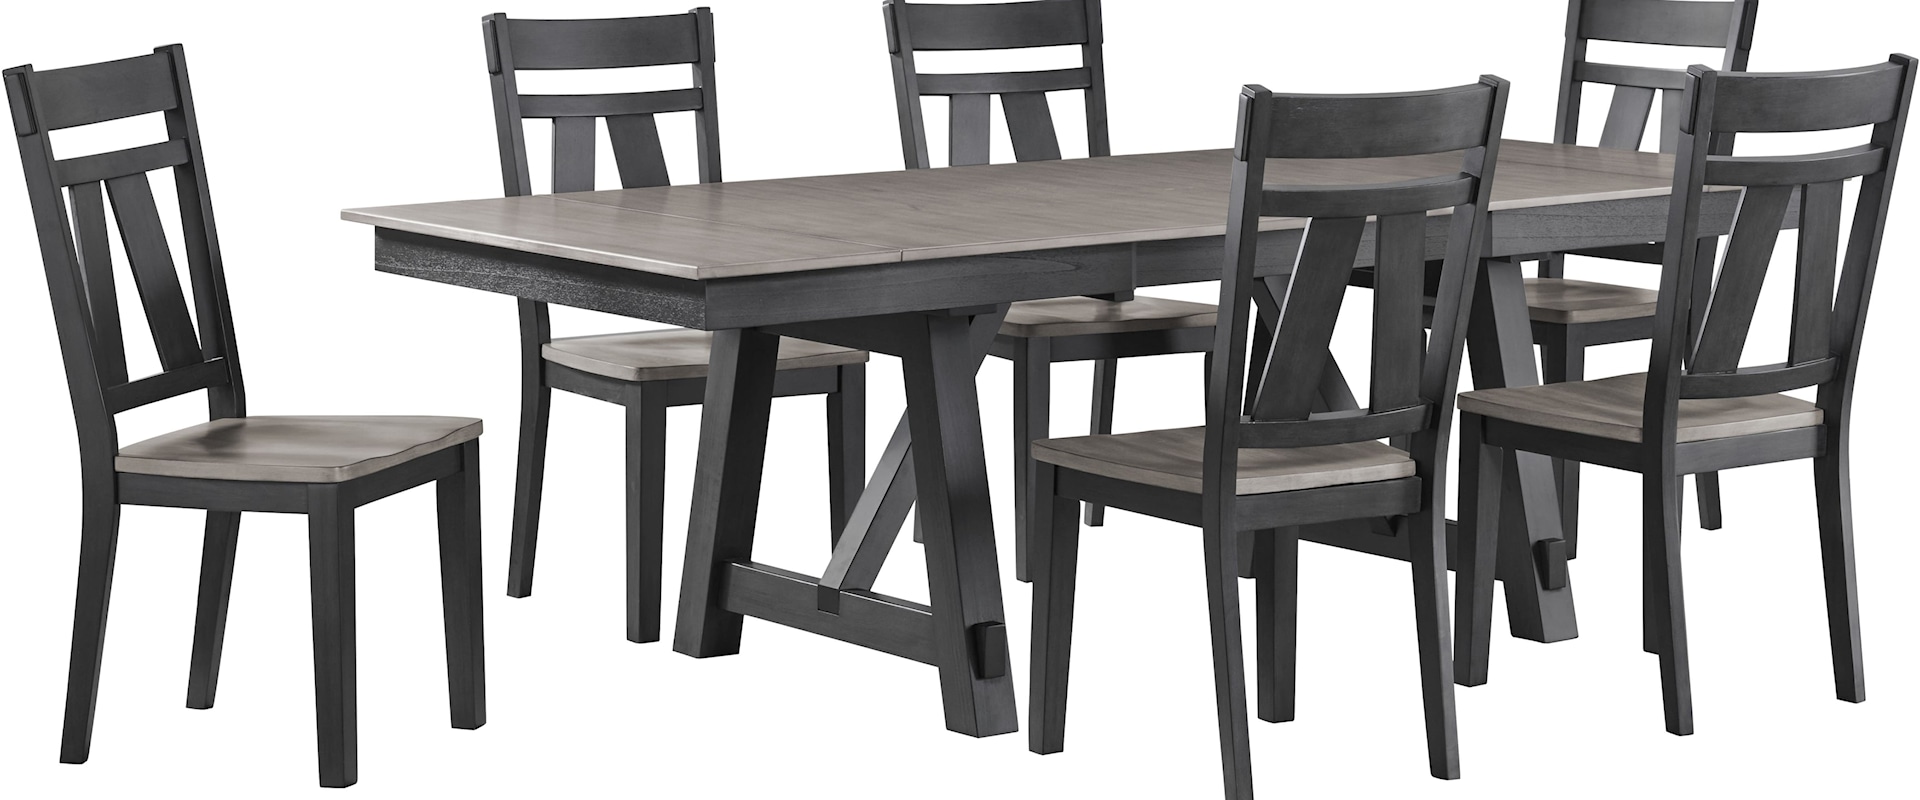 7-PIECE DINING SET With Self Storing Leaves